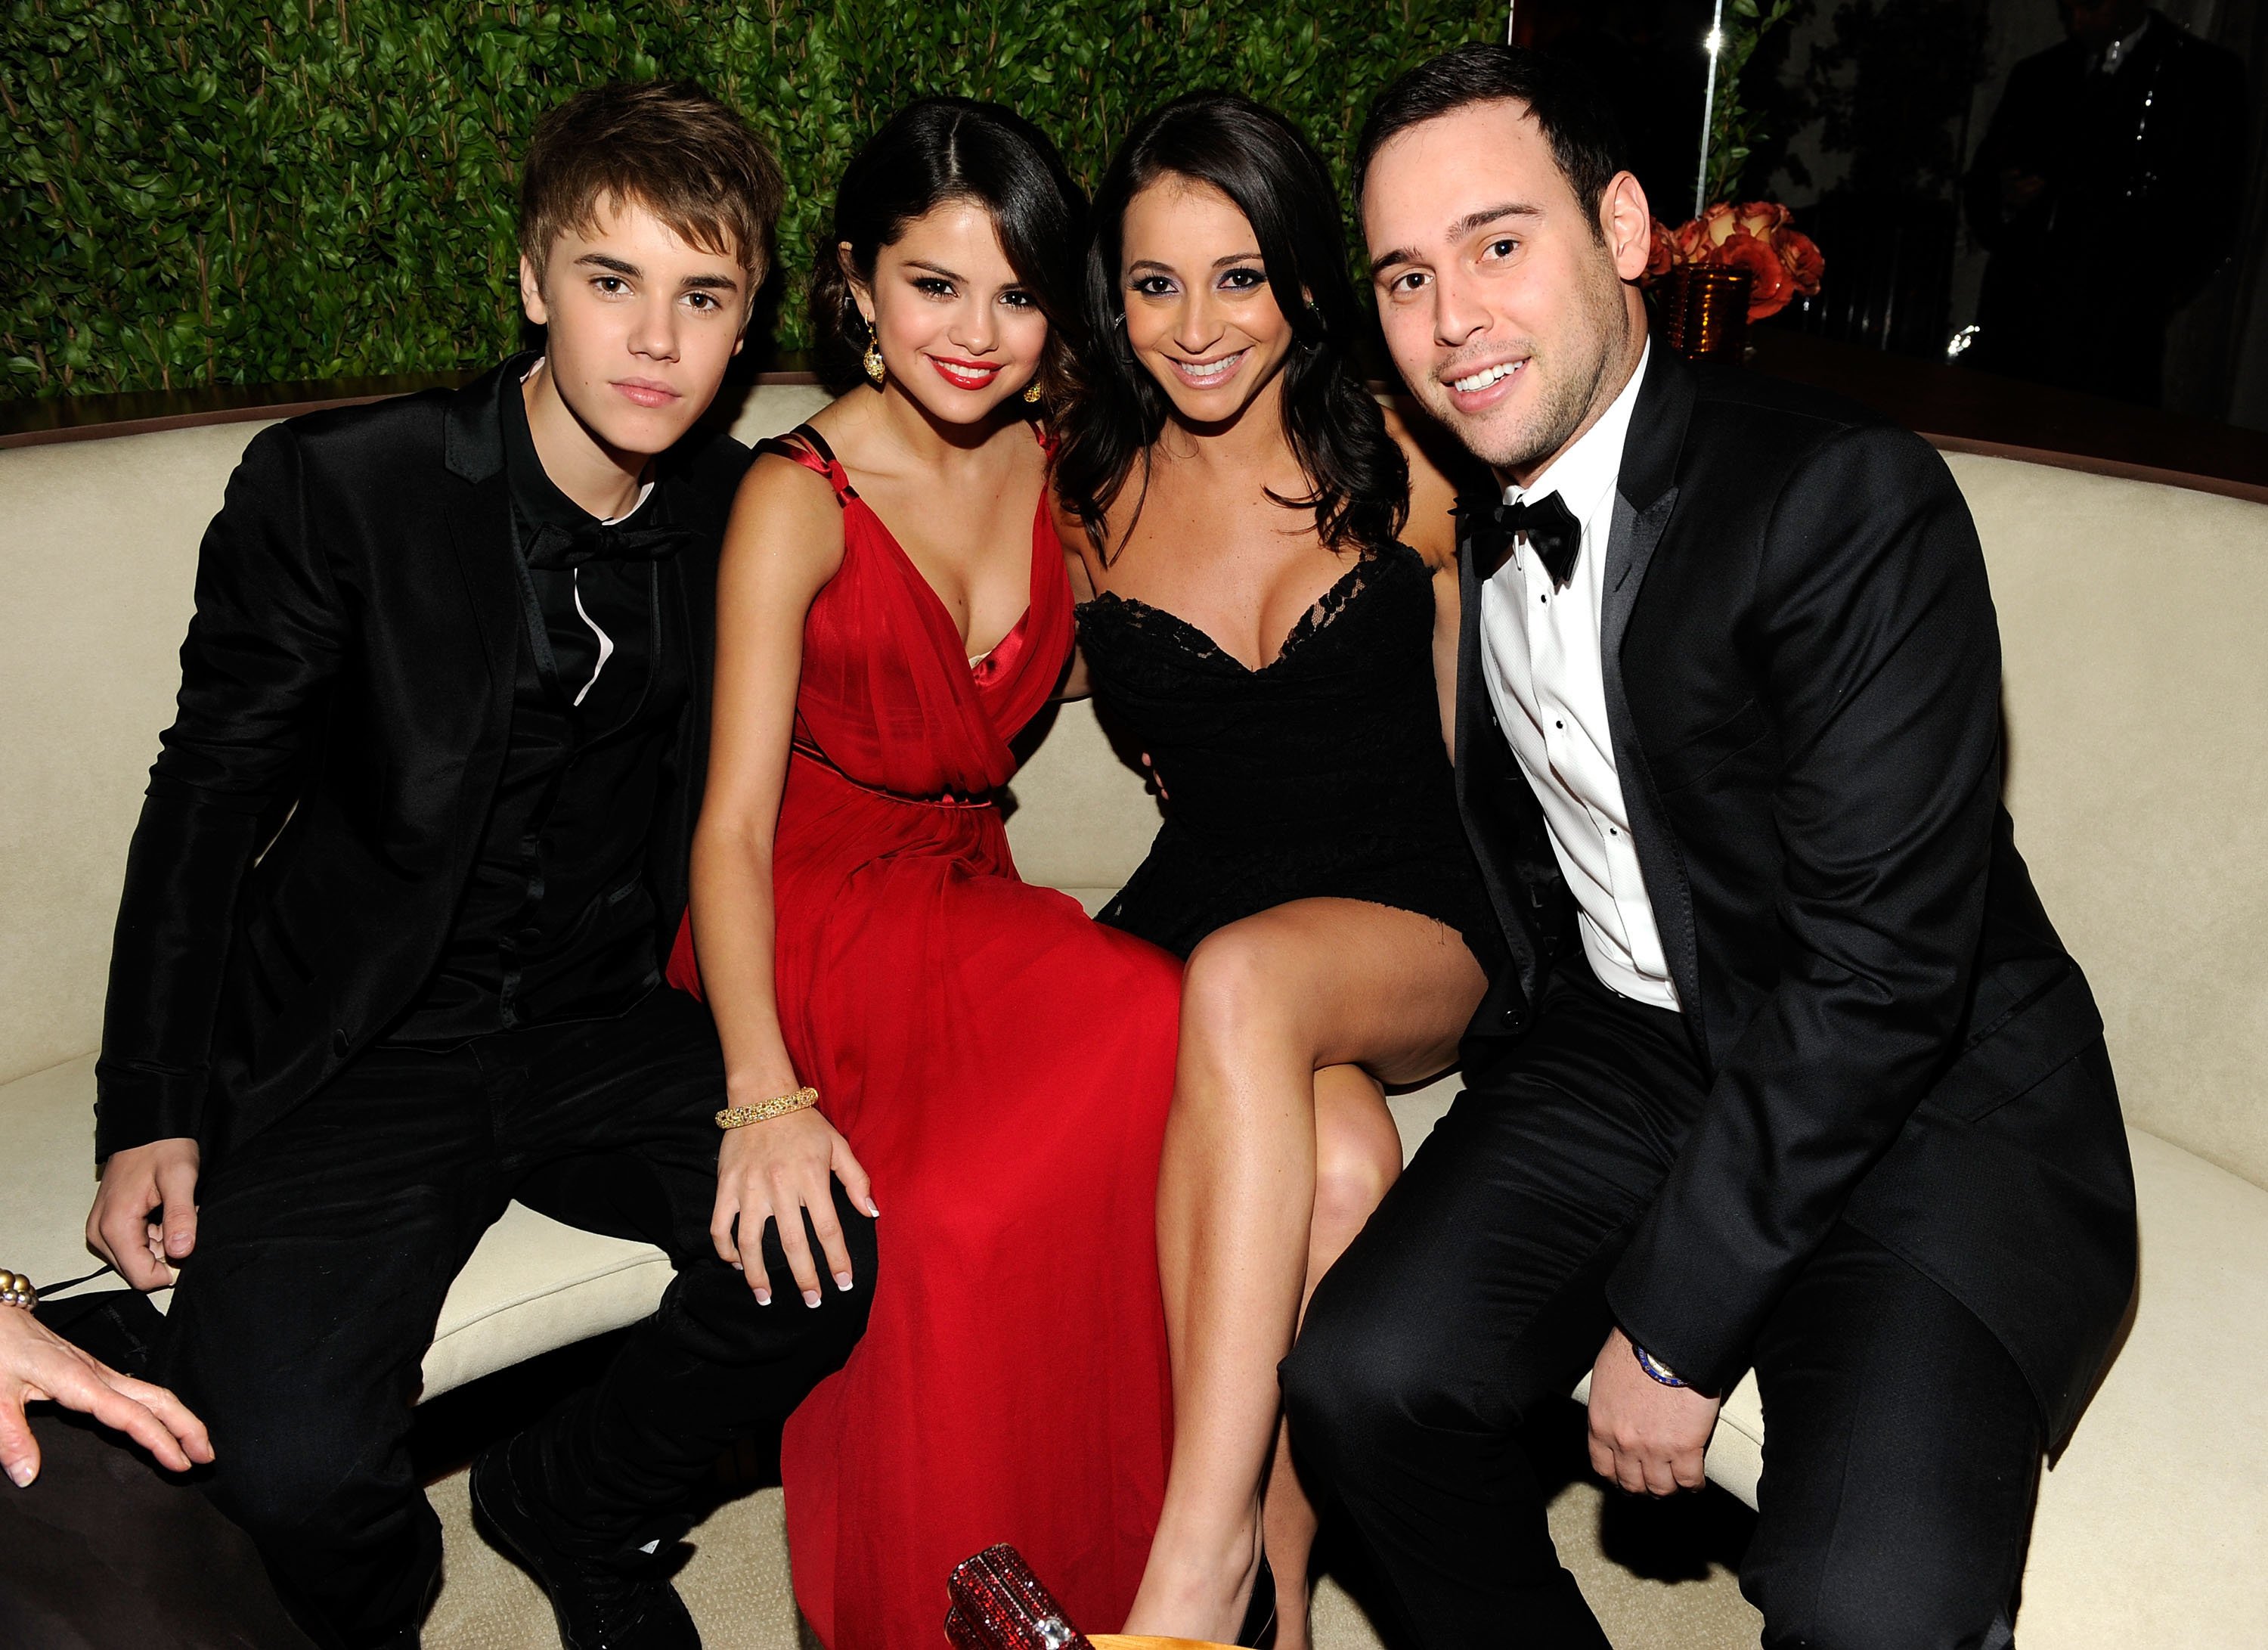 Justin Bieber, Selena Gomez, guest, and Scooter Braun attend the 2011 Vanity Fair Oscar Party on February 27, 2011, in West Hollywood, California. 